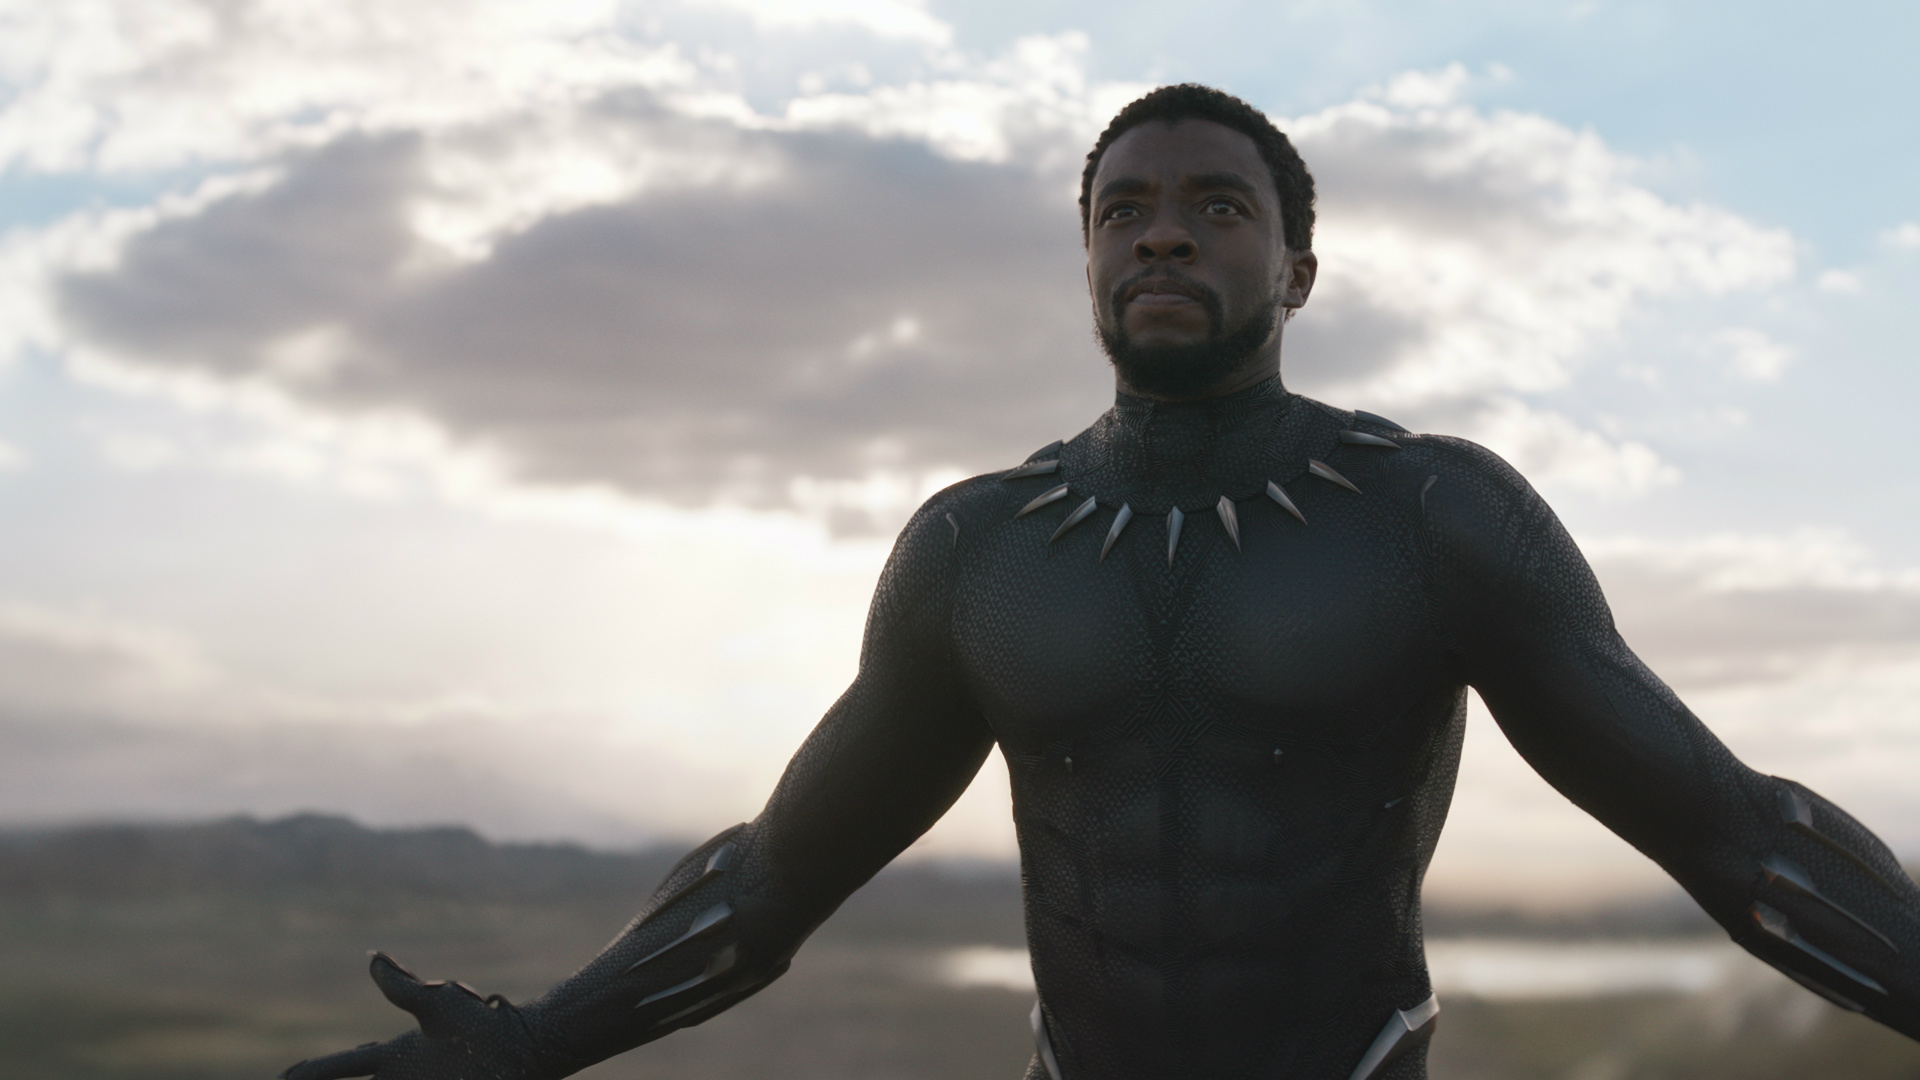 From #OscarsSoWhite to “Black Panther”